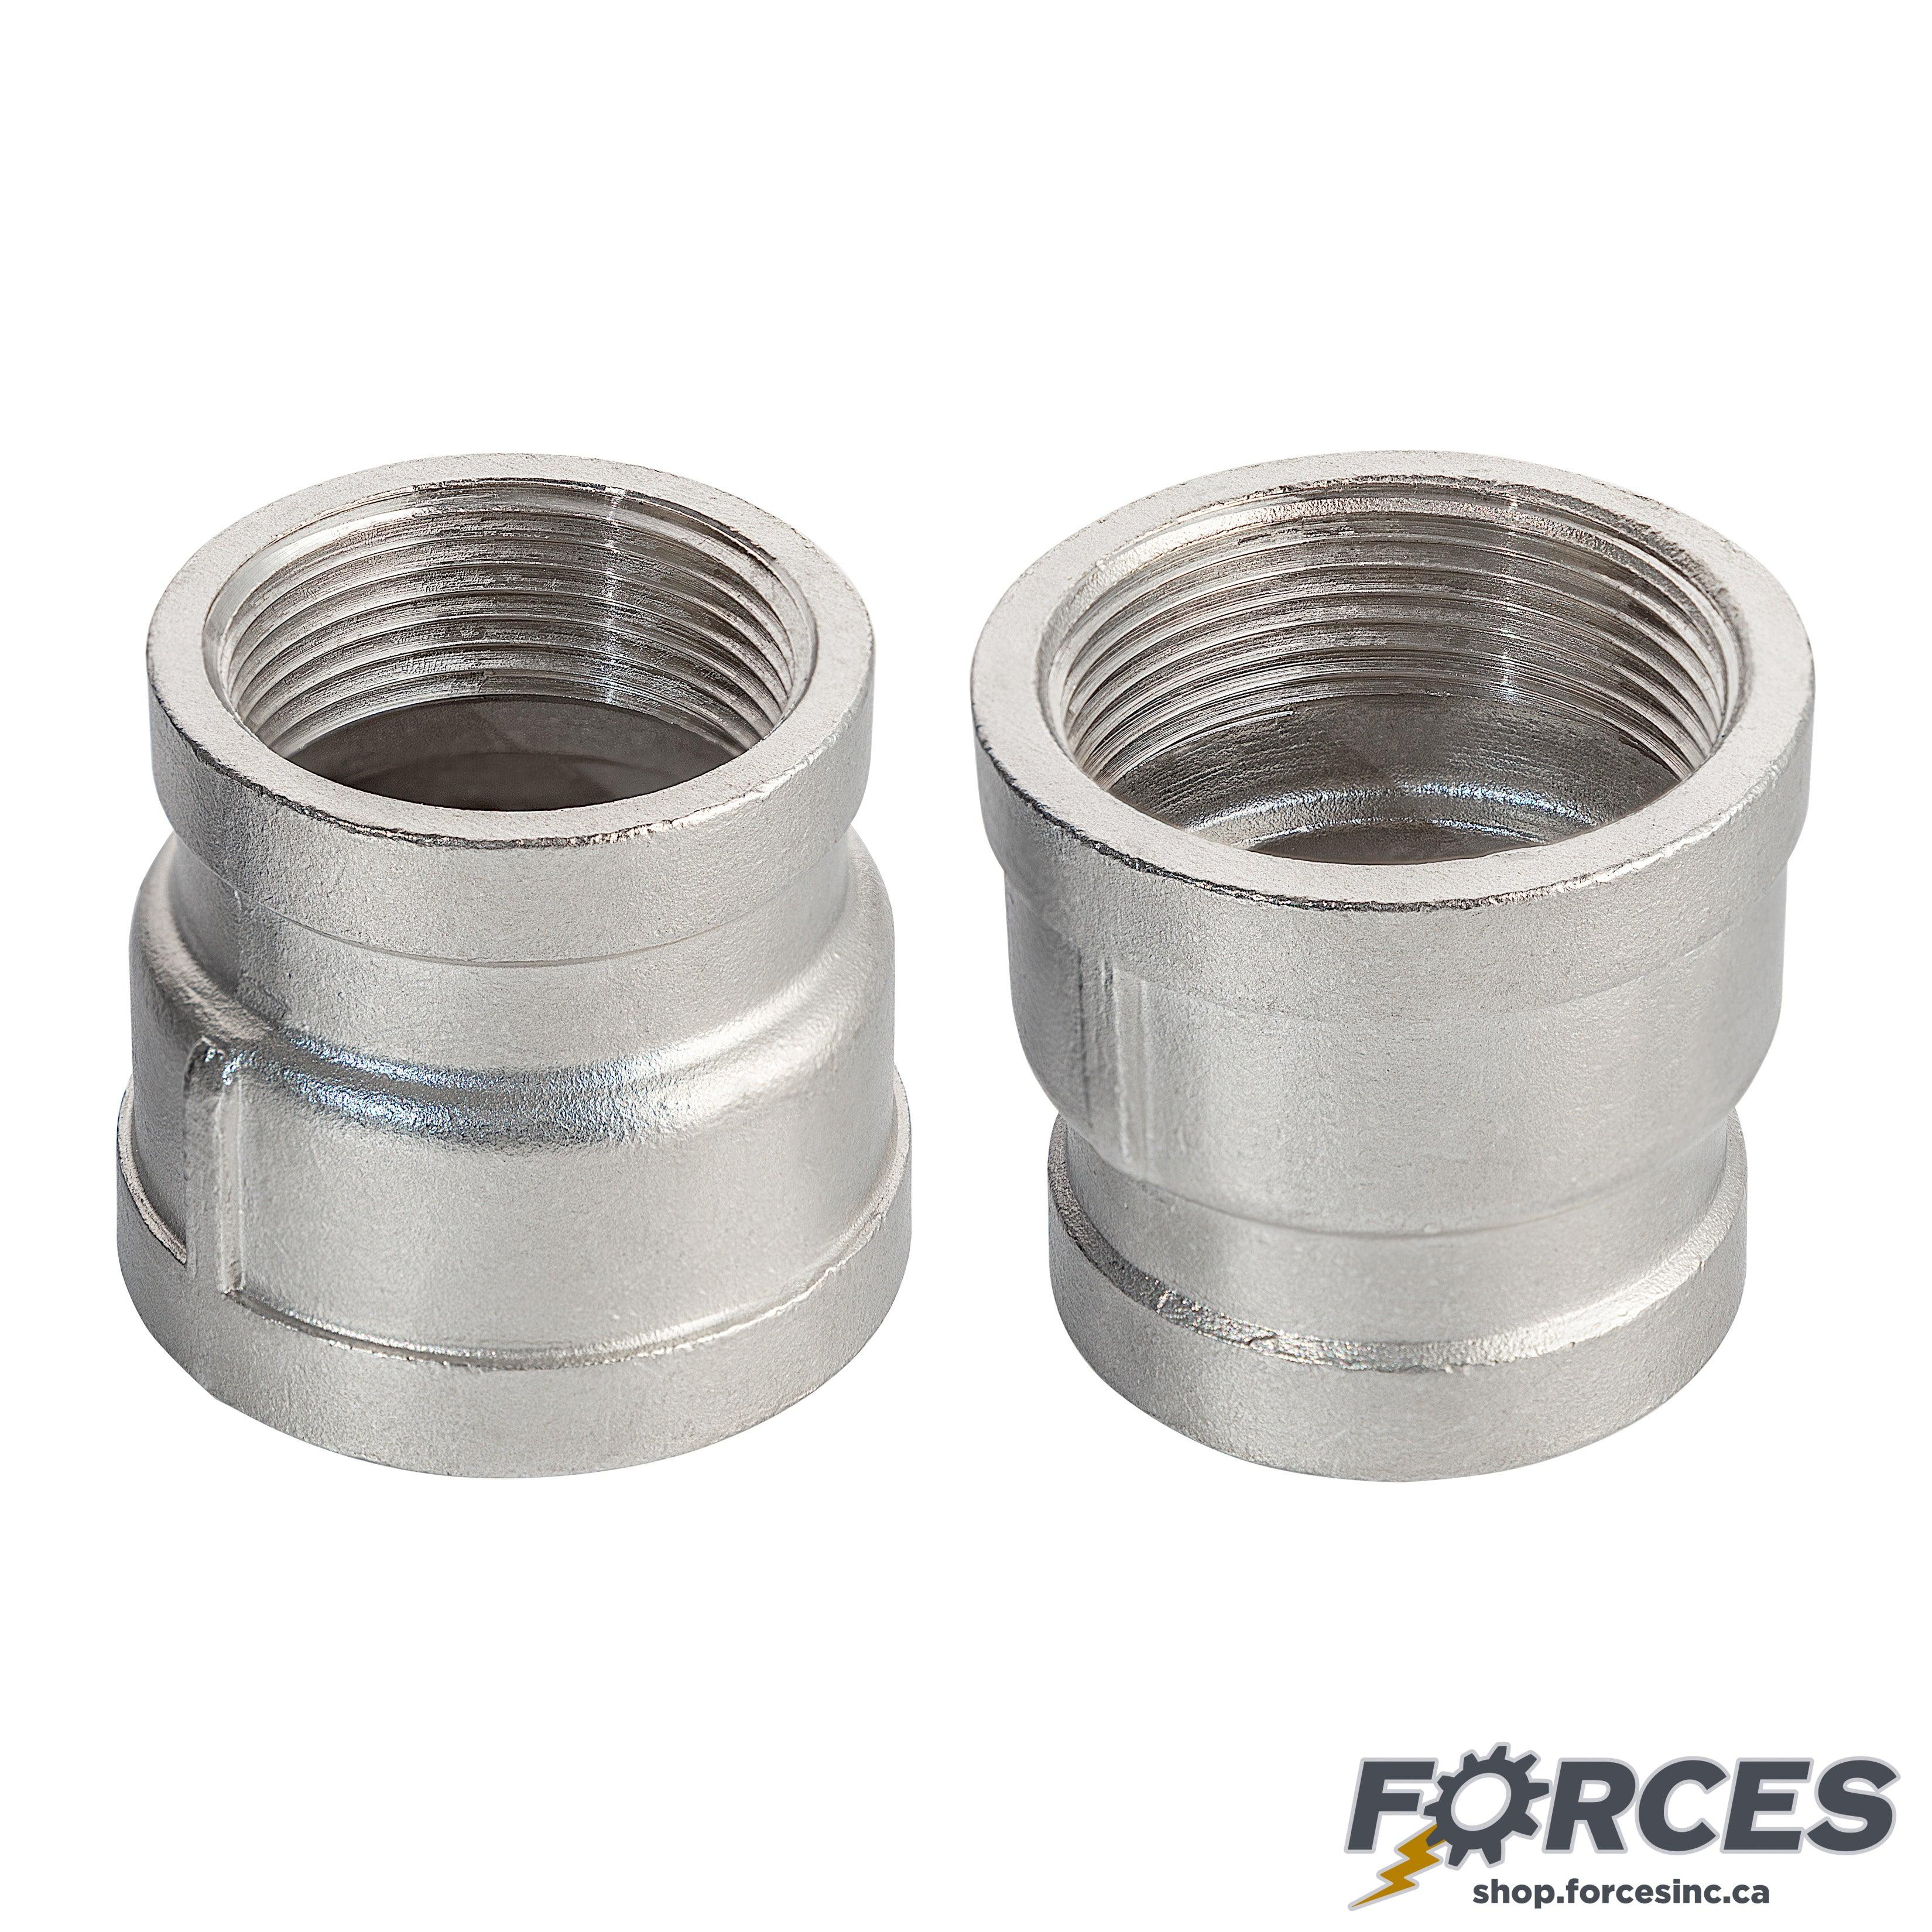 1-1/2" x 3/4" Coupling Reducer NPT #150 - Stainless Steel 316 - Forces Inc